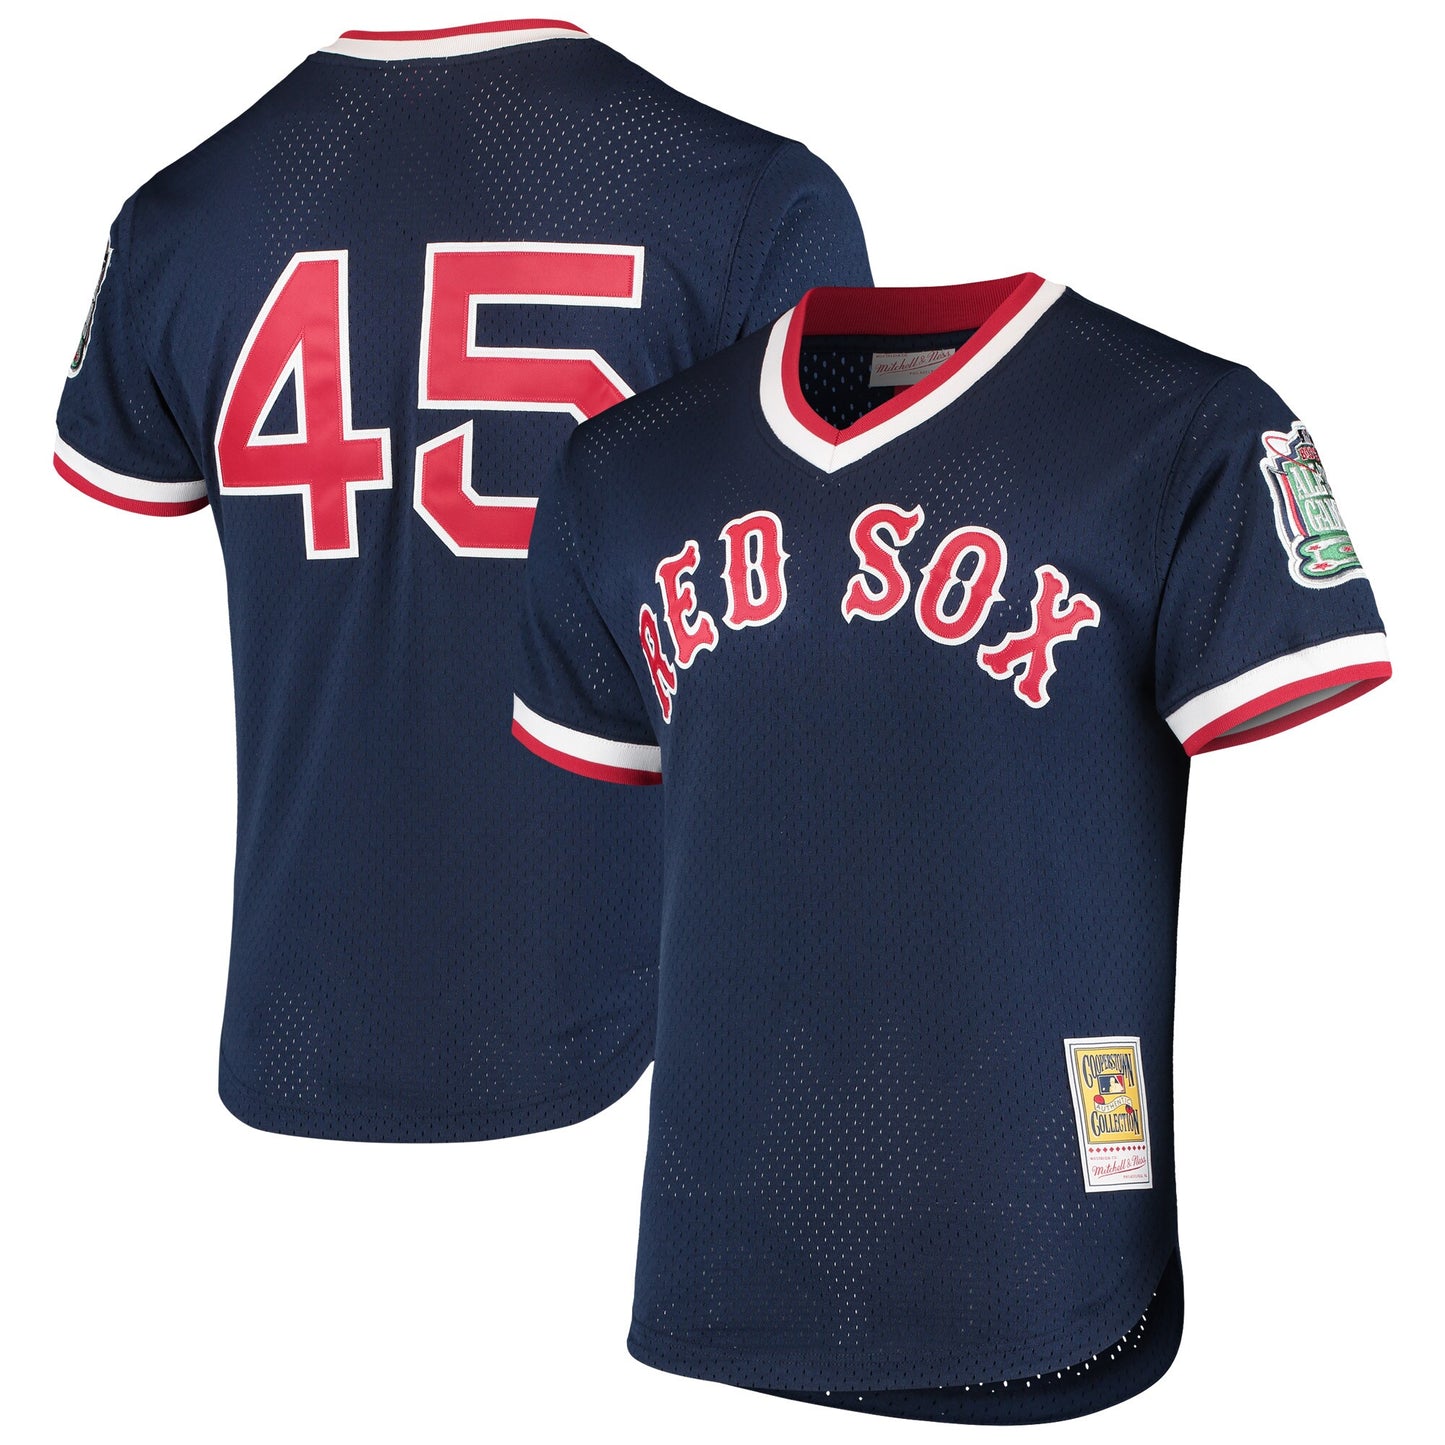 Pedro Martinez Boston Red Sox Mitchell & Ness 1999 Cooperstown Collection Mesh Batting Practice Jersey - Navy